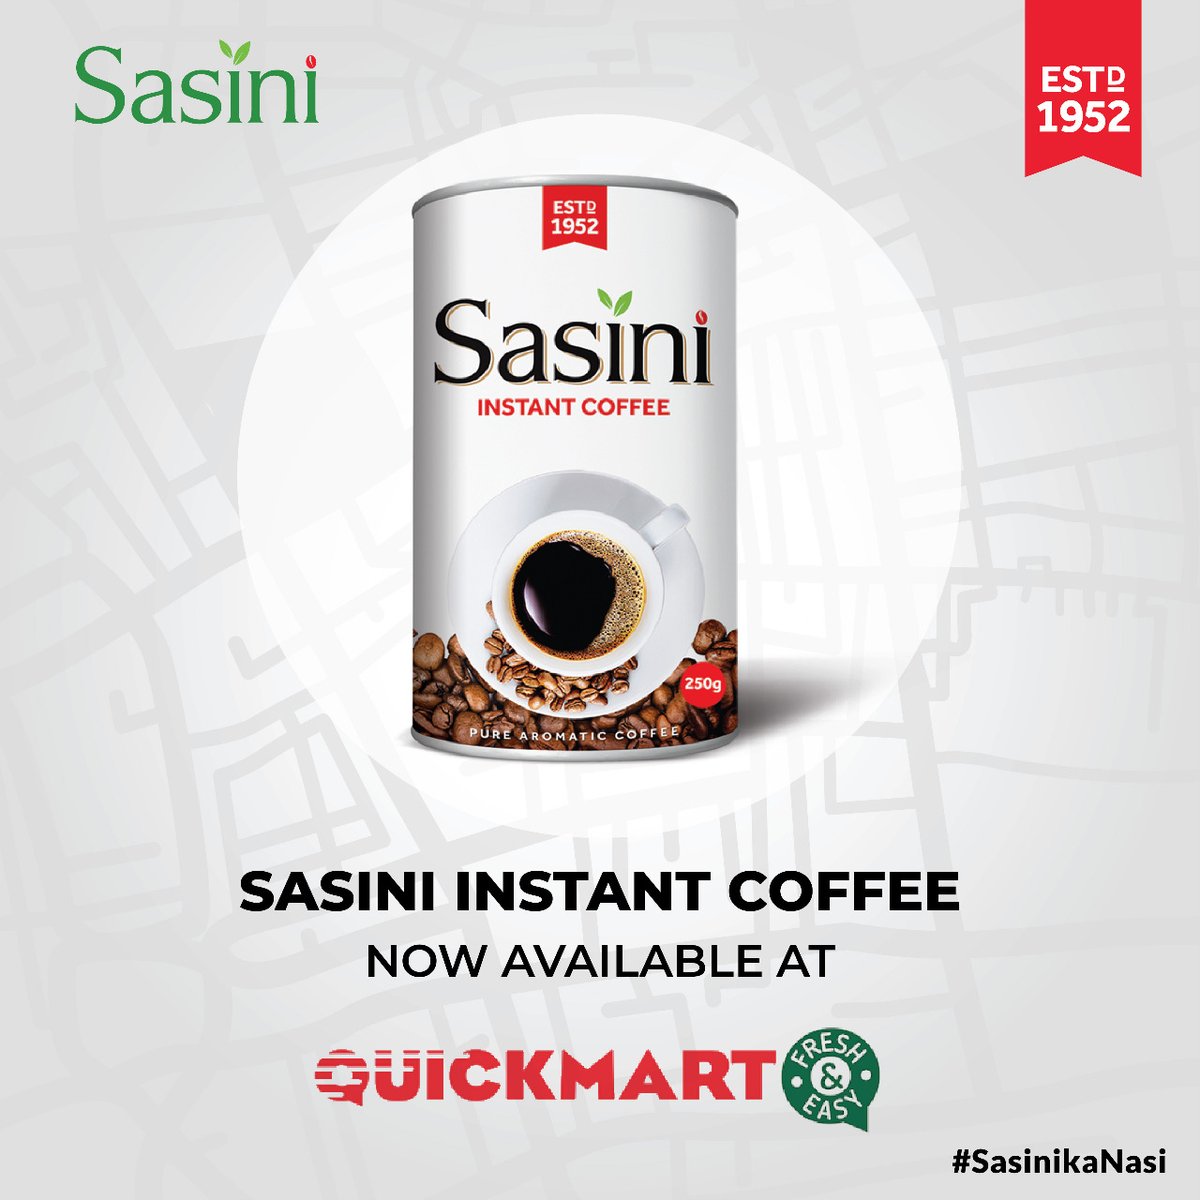 Get set for the incoming new month by grabbing our new Sasini instant coffee across @quickmart stores countrywide.

#Sasin #Sasinika #instantcoffee